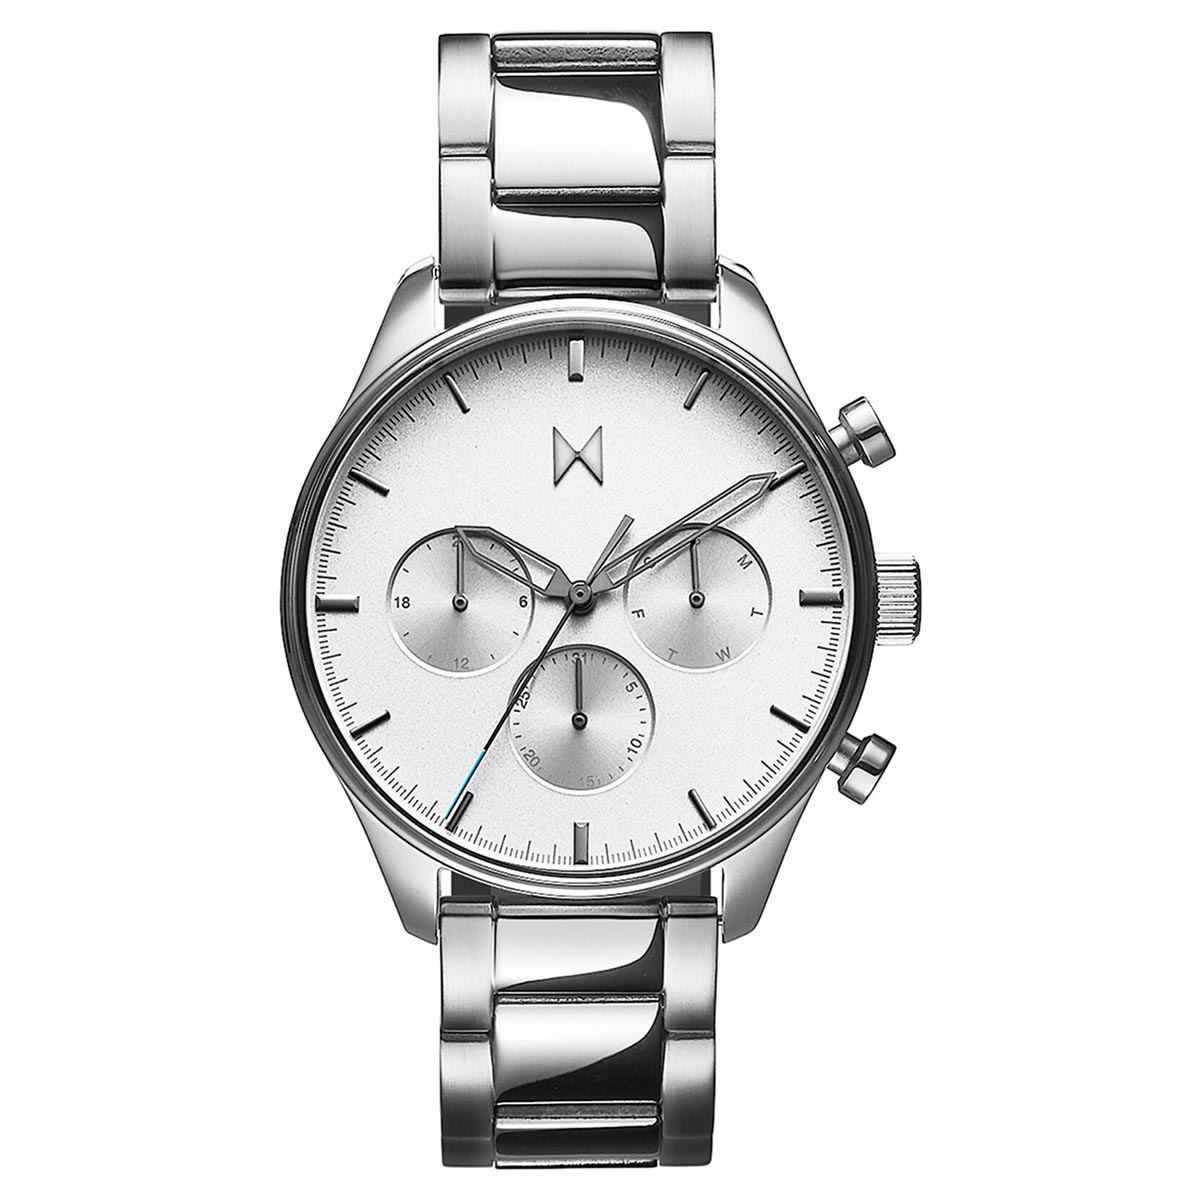 MVMT by Movado Airhawk Mens Watch with White Dial and Stainless Steel Bracelet (quartz movement)